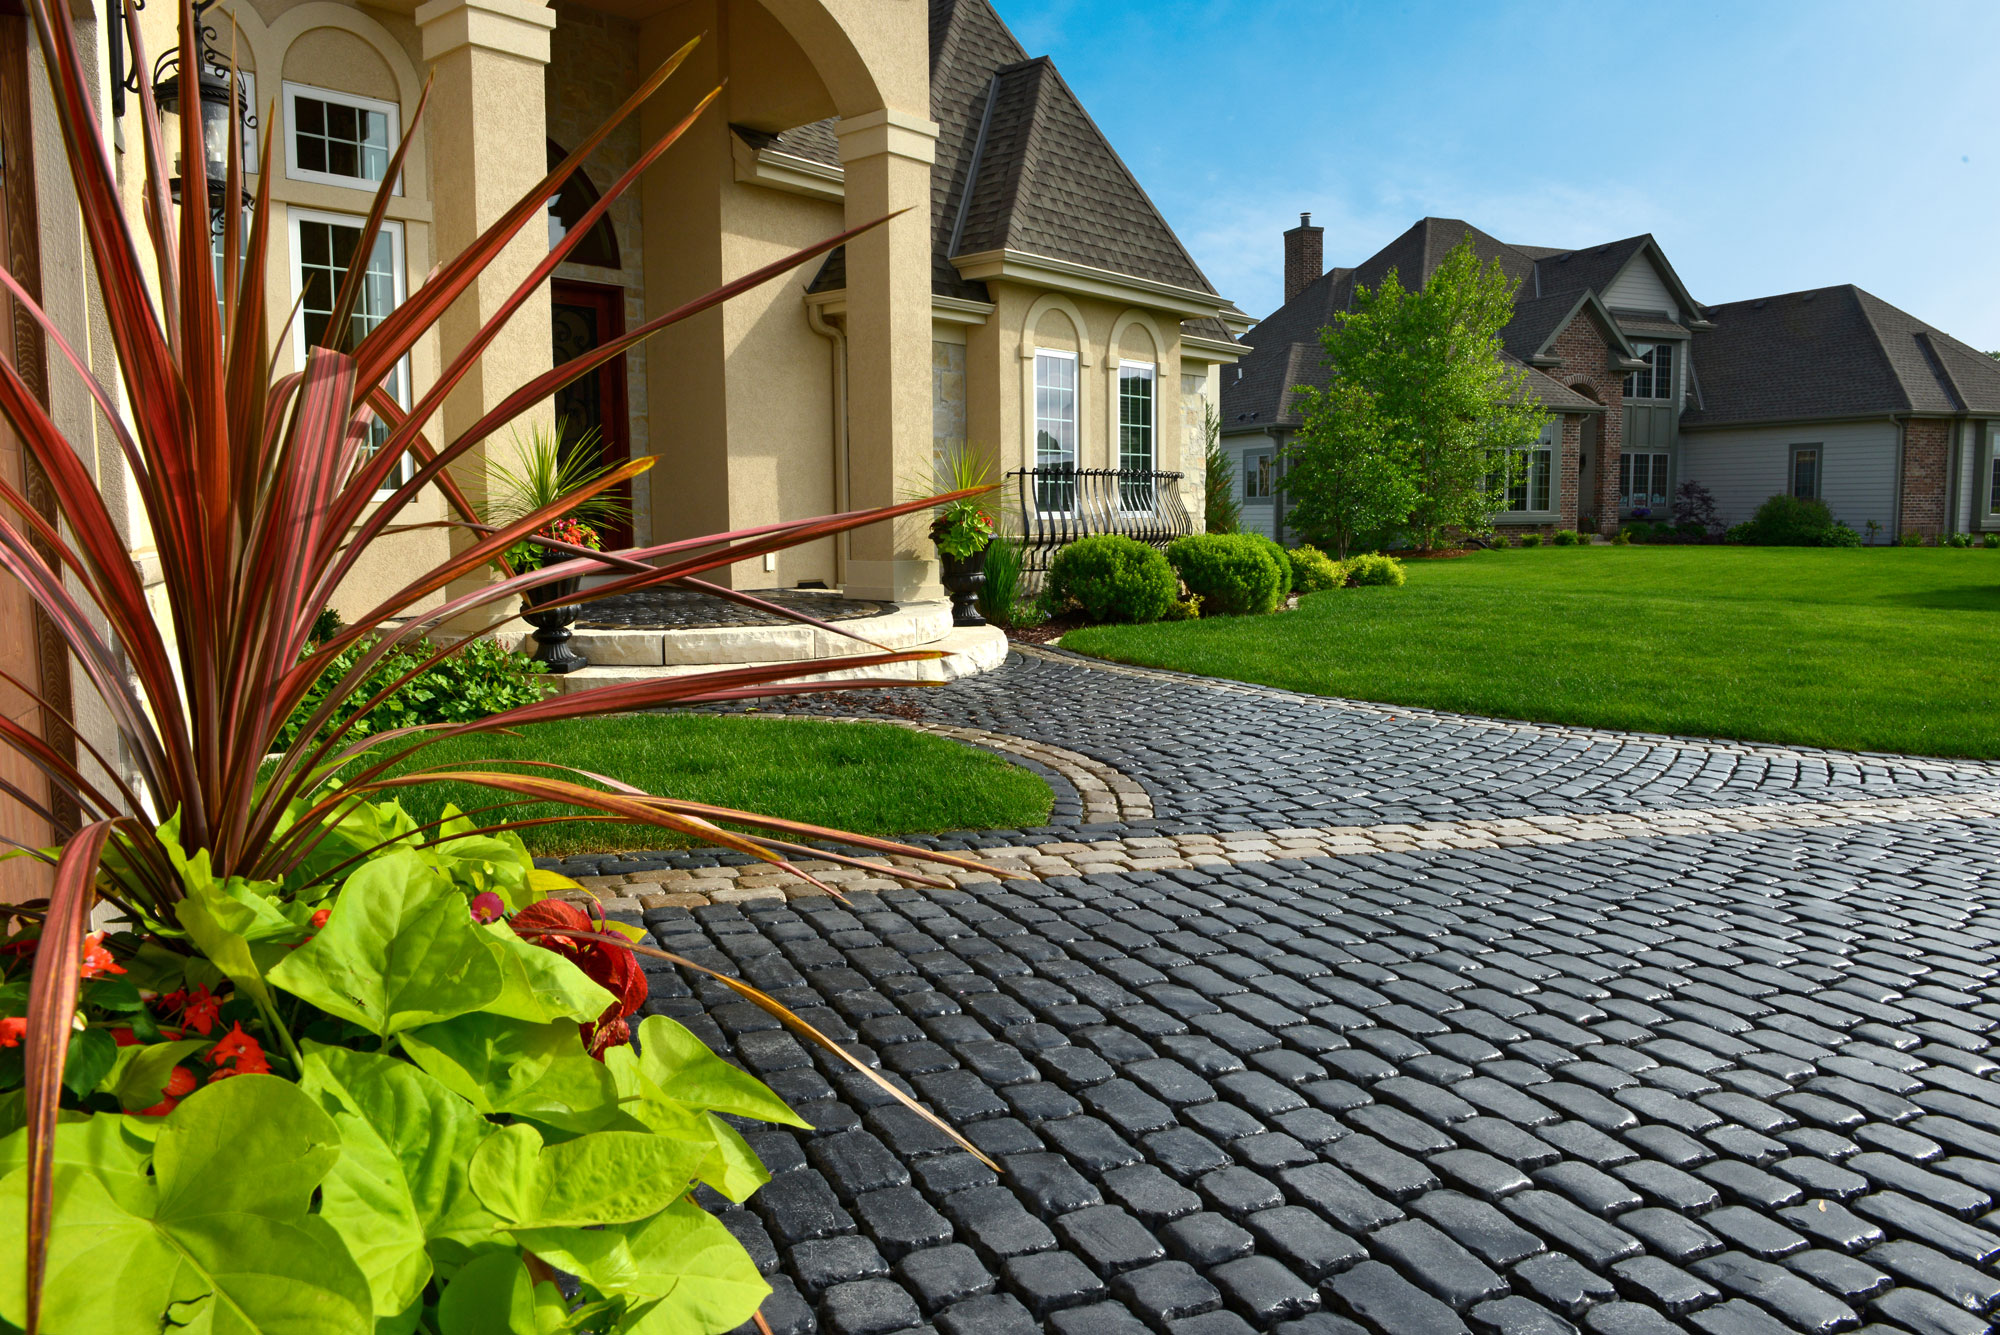 Driveway Pavers in NY, CT, NJ, PA